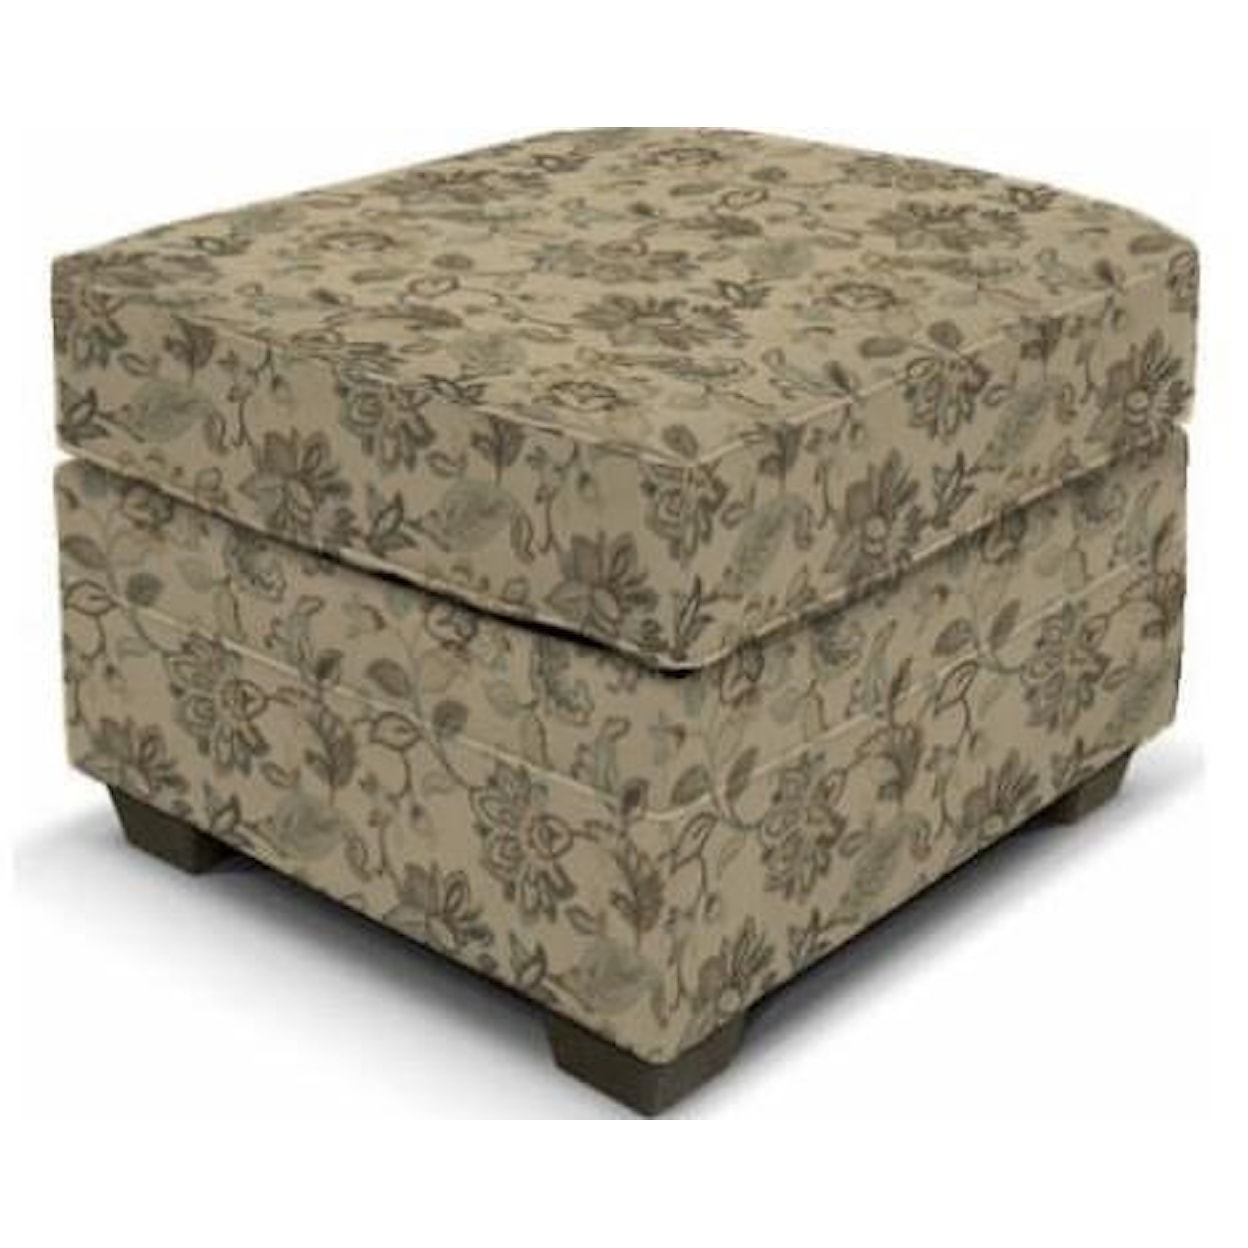 England 2250/N Series Welted Ottoman